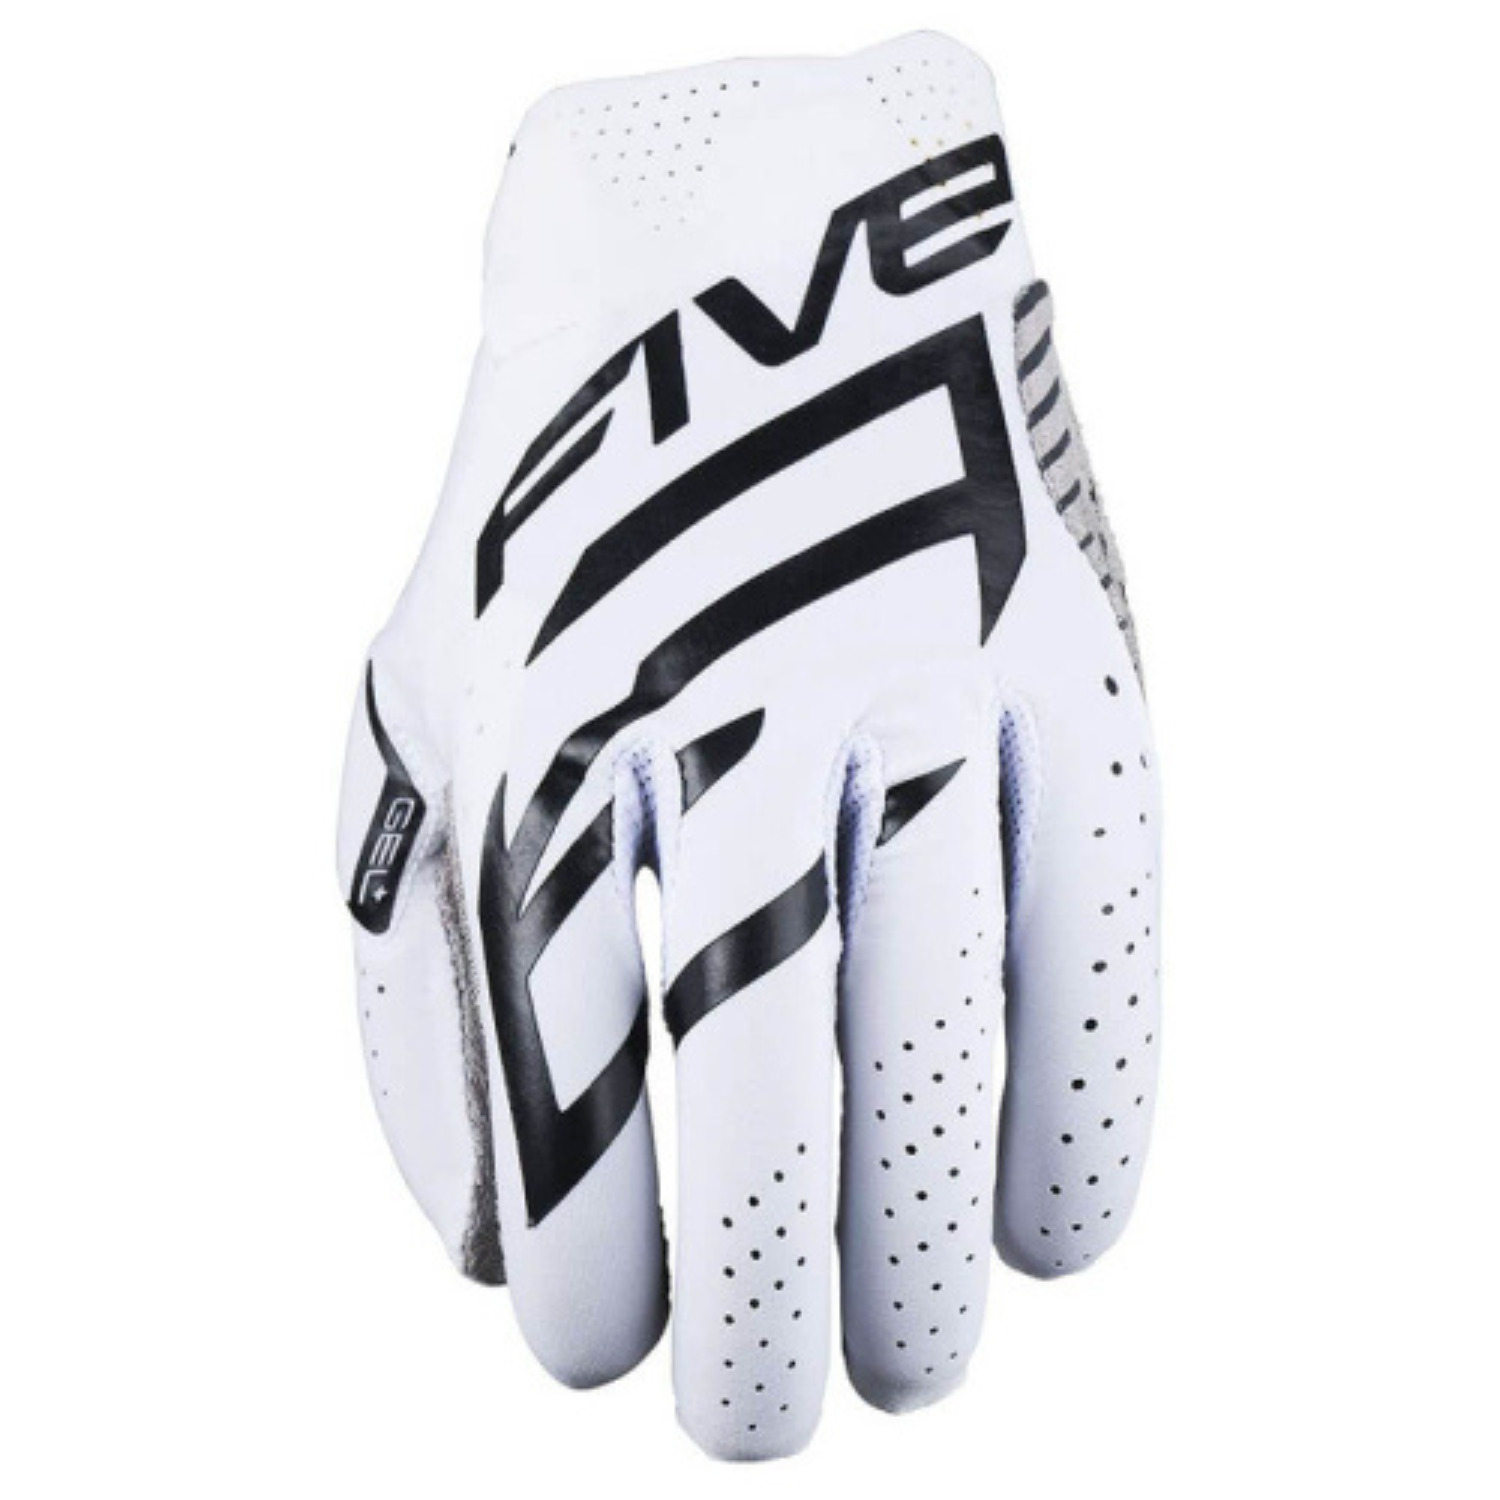 Image of Five MXF Race Gloves White Black Size 2XL ID 3841300111877